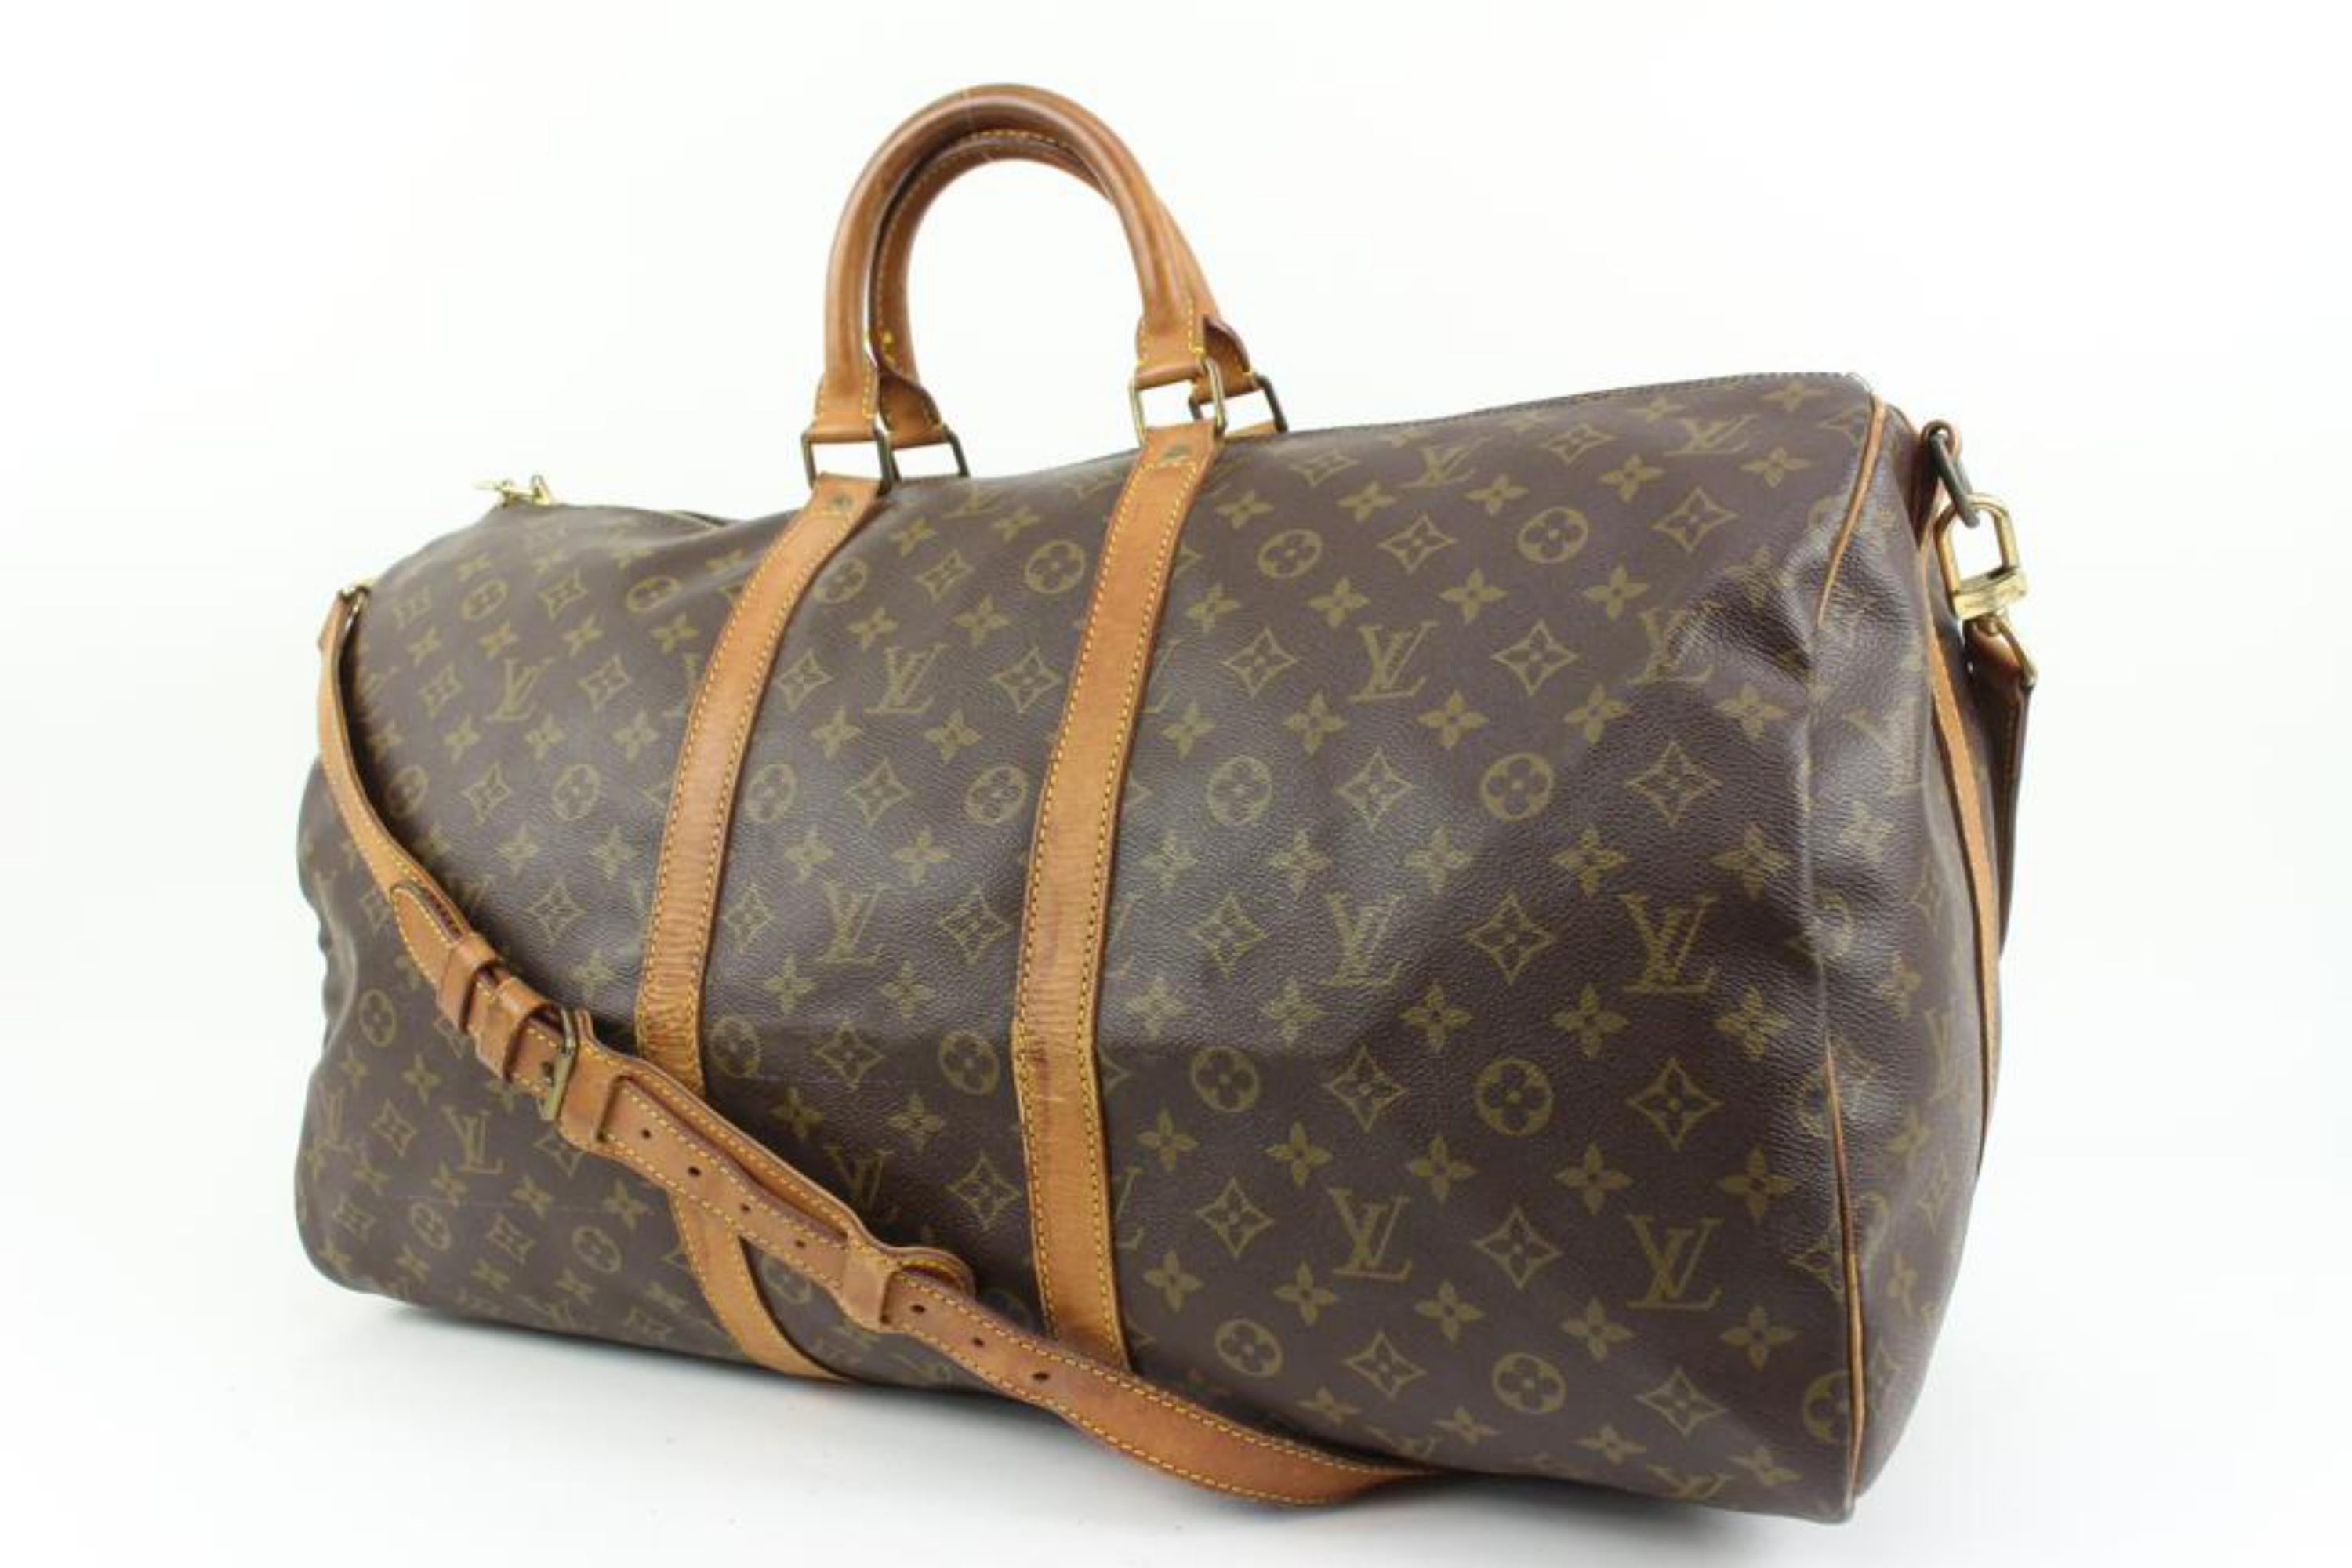 Louis Vuitton Monogram Keepall Bandouliere 55 Boston Duffle Bag with Strap 40lk420s
Date Code/Serial Number: VI8904
Made In: France
Measurements: Length:  22